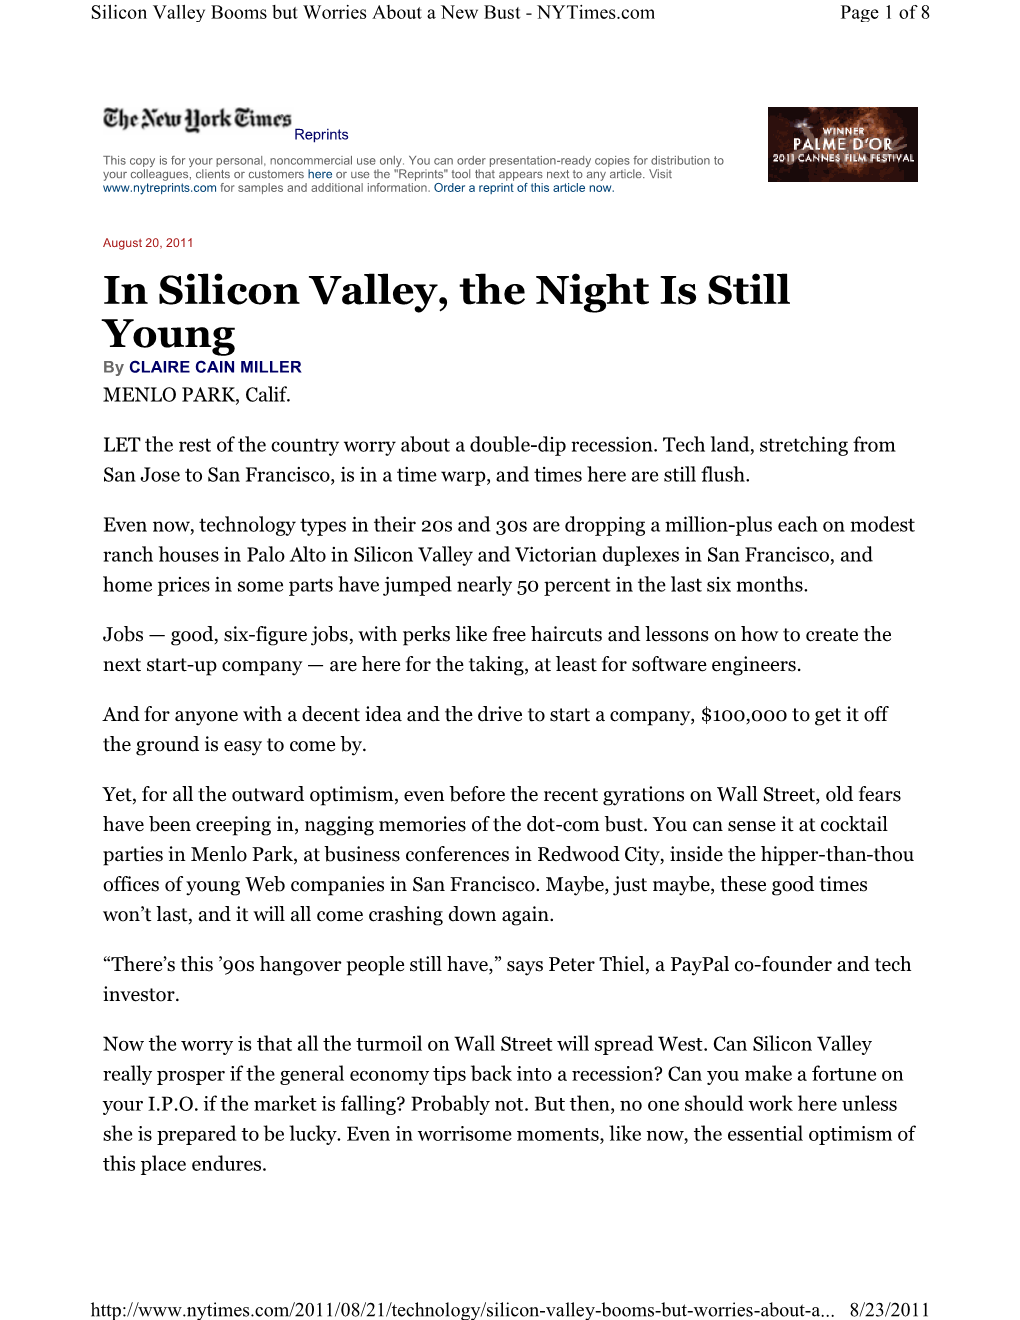 In Silicon Valley, the Night Is Still Young by CLAIRE CAIN MILLER MENLO PARK, Calif